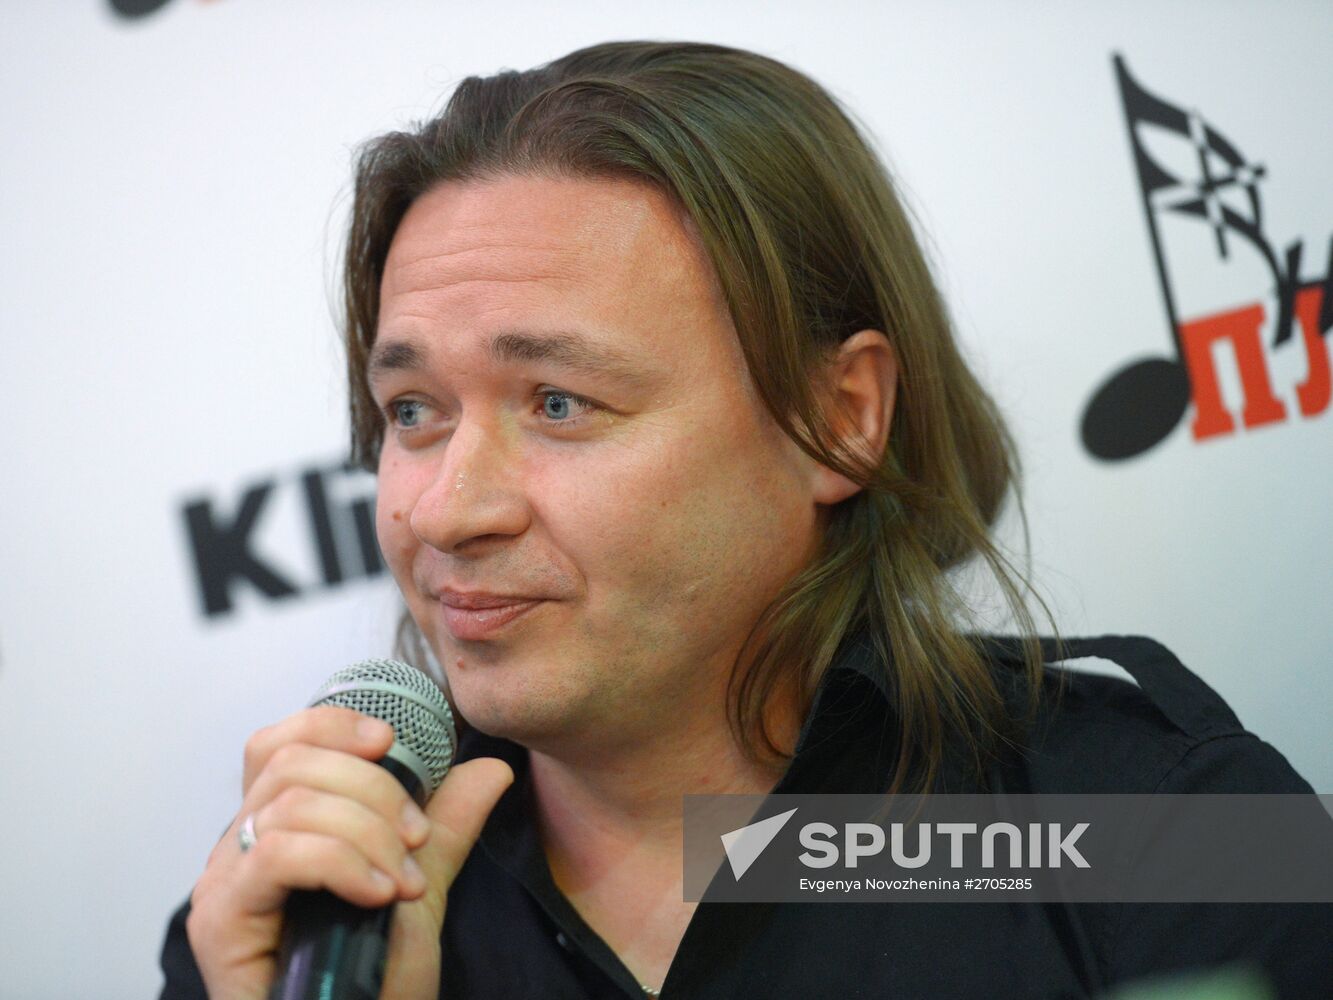 Joint news conference by Aria band and Valery Kipelov